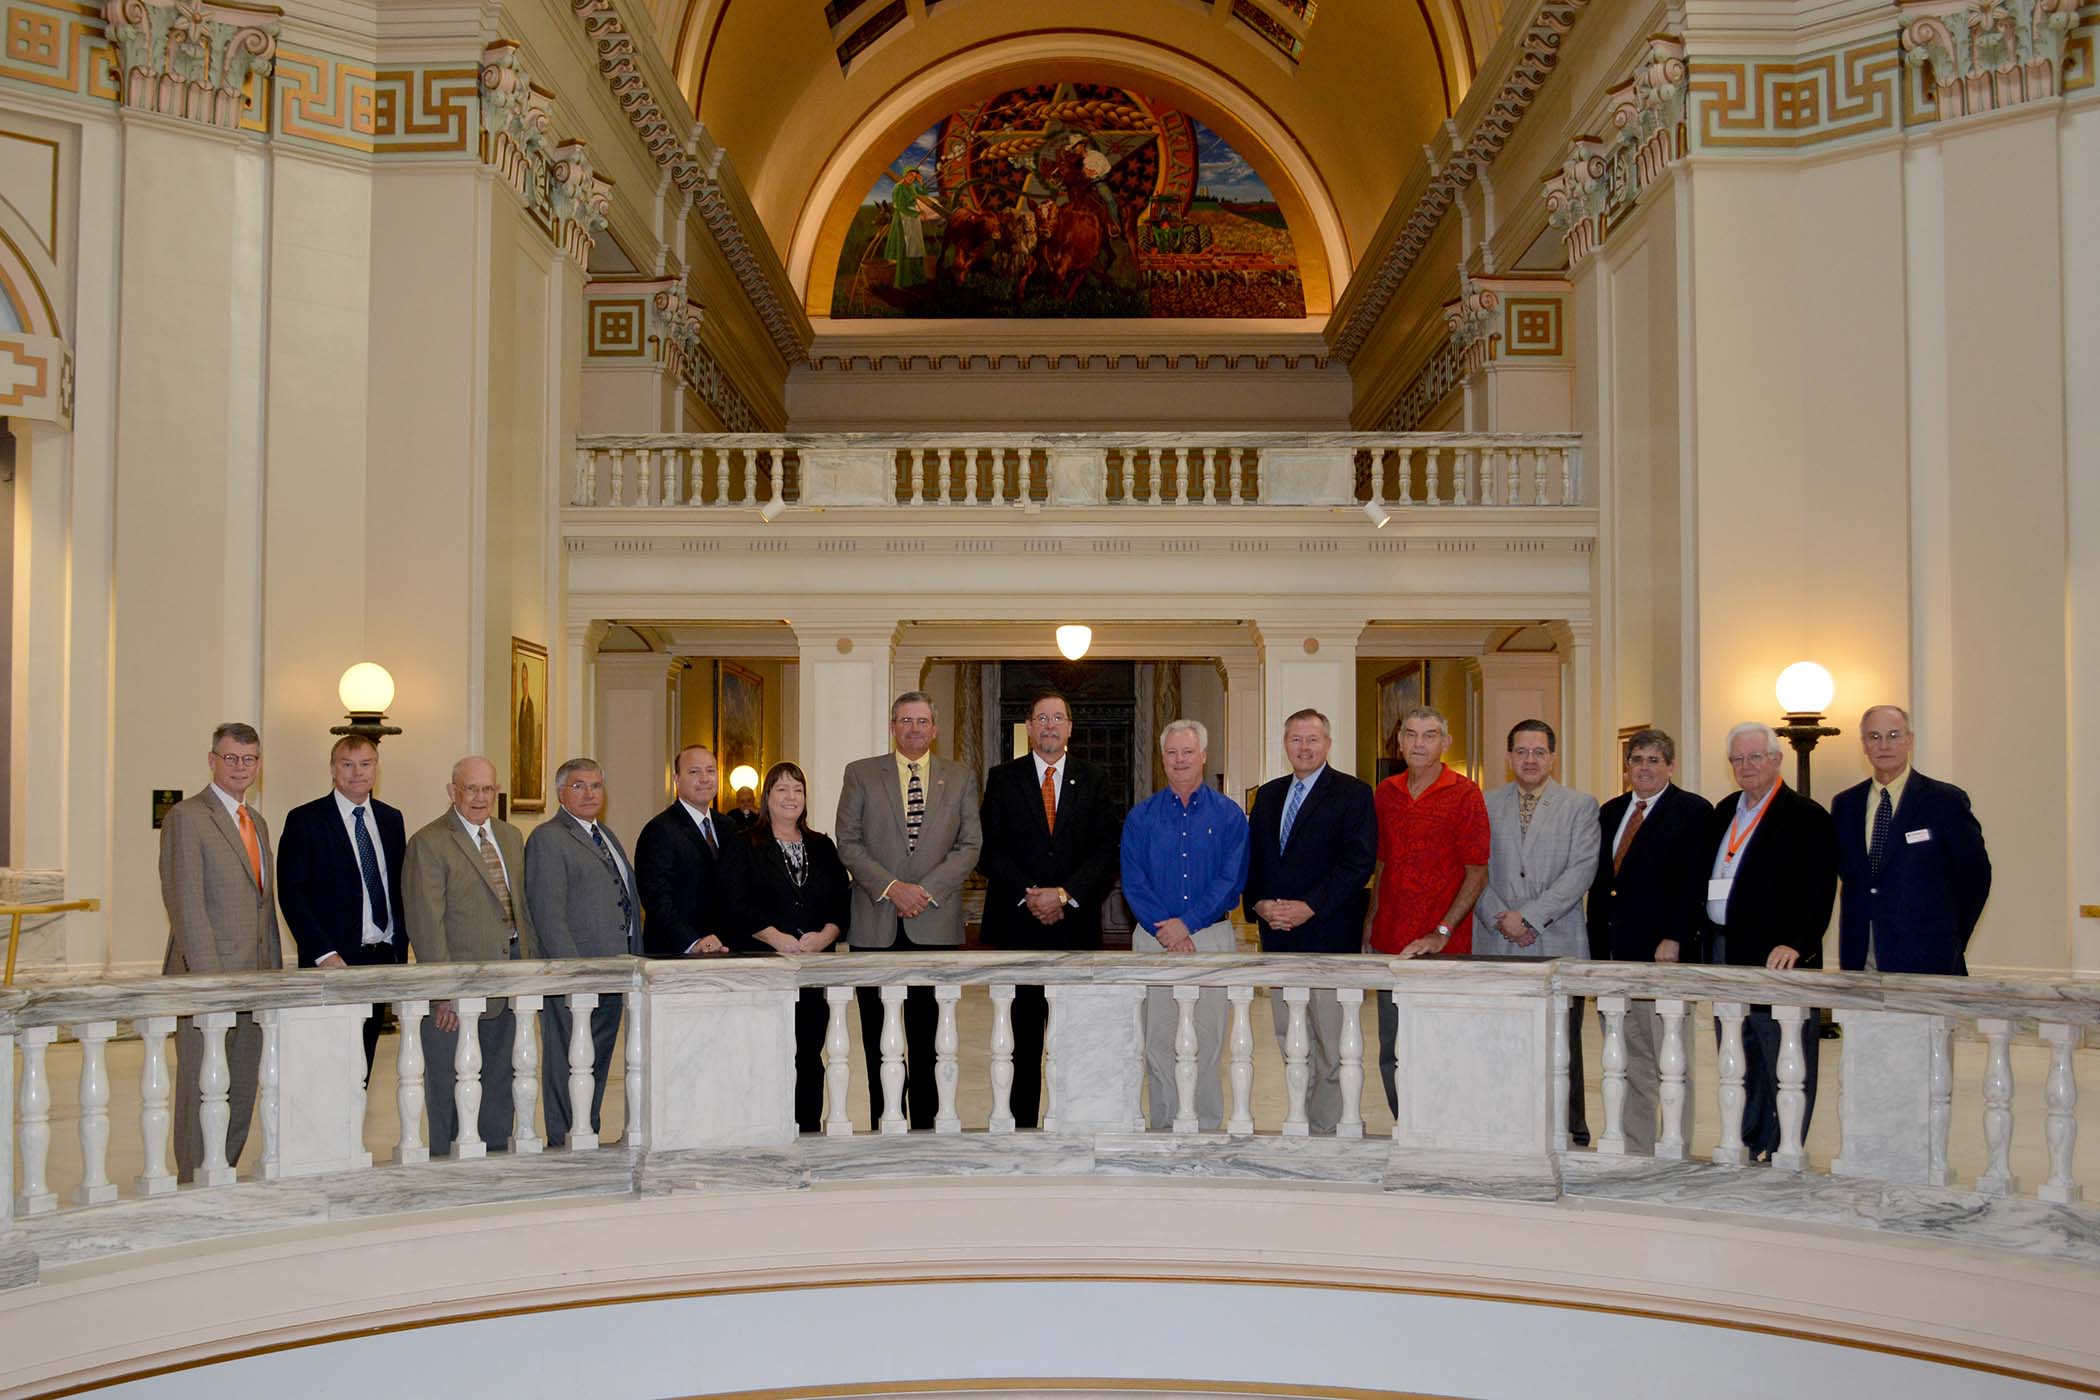 Food industry leaders meet at Capitol to discuss food and ag issues